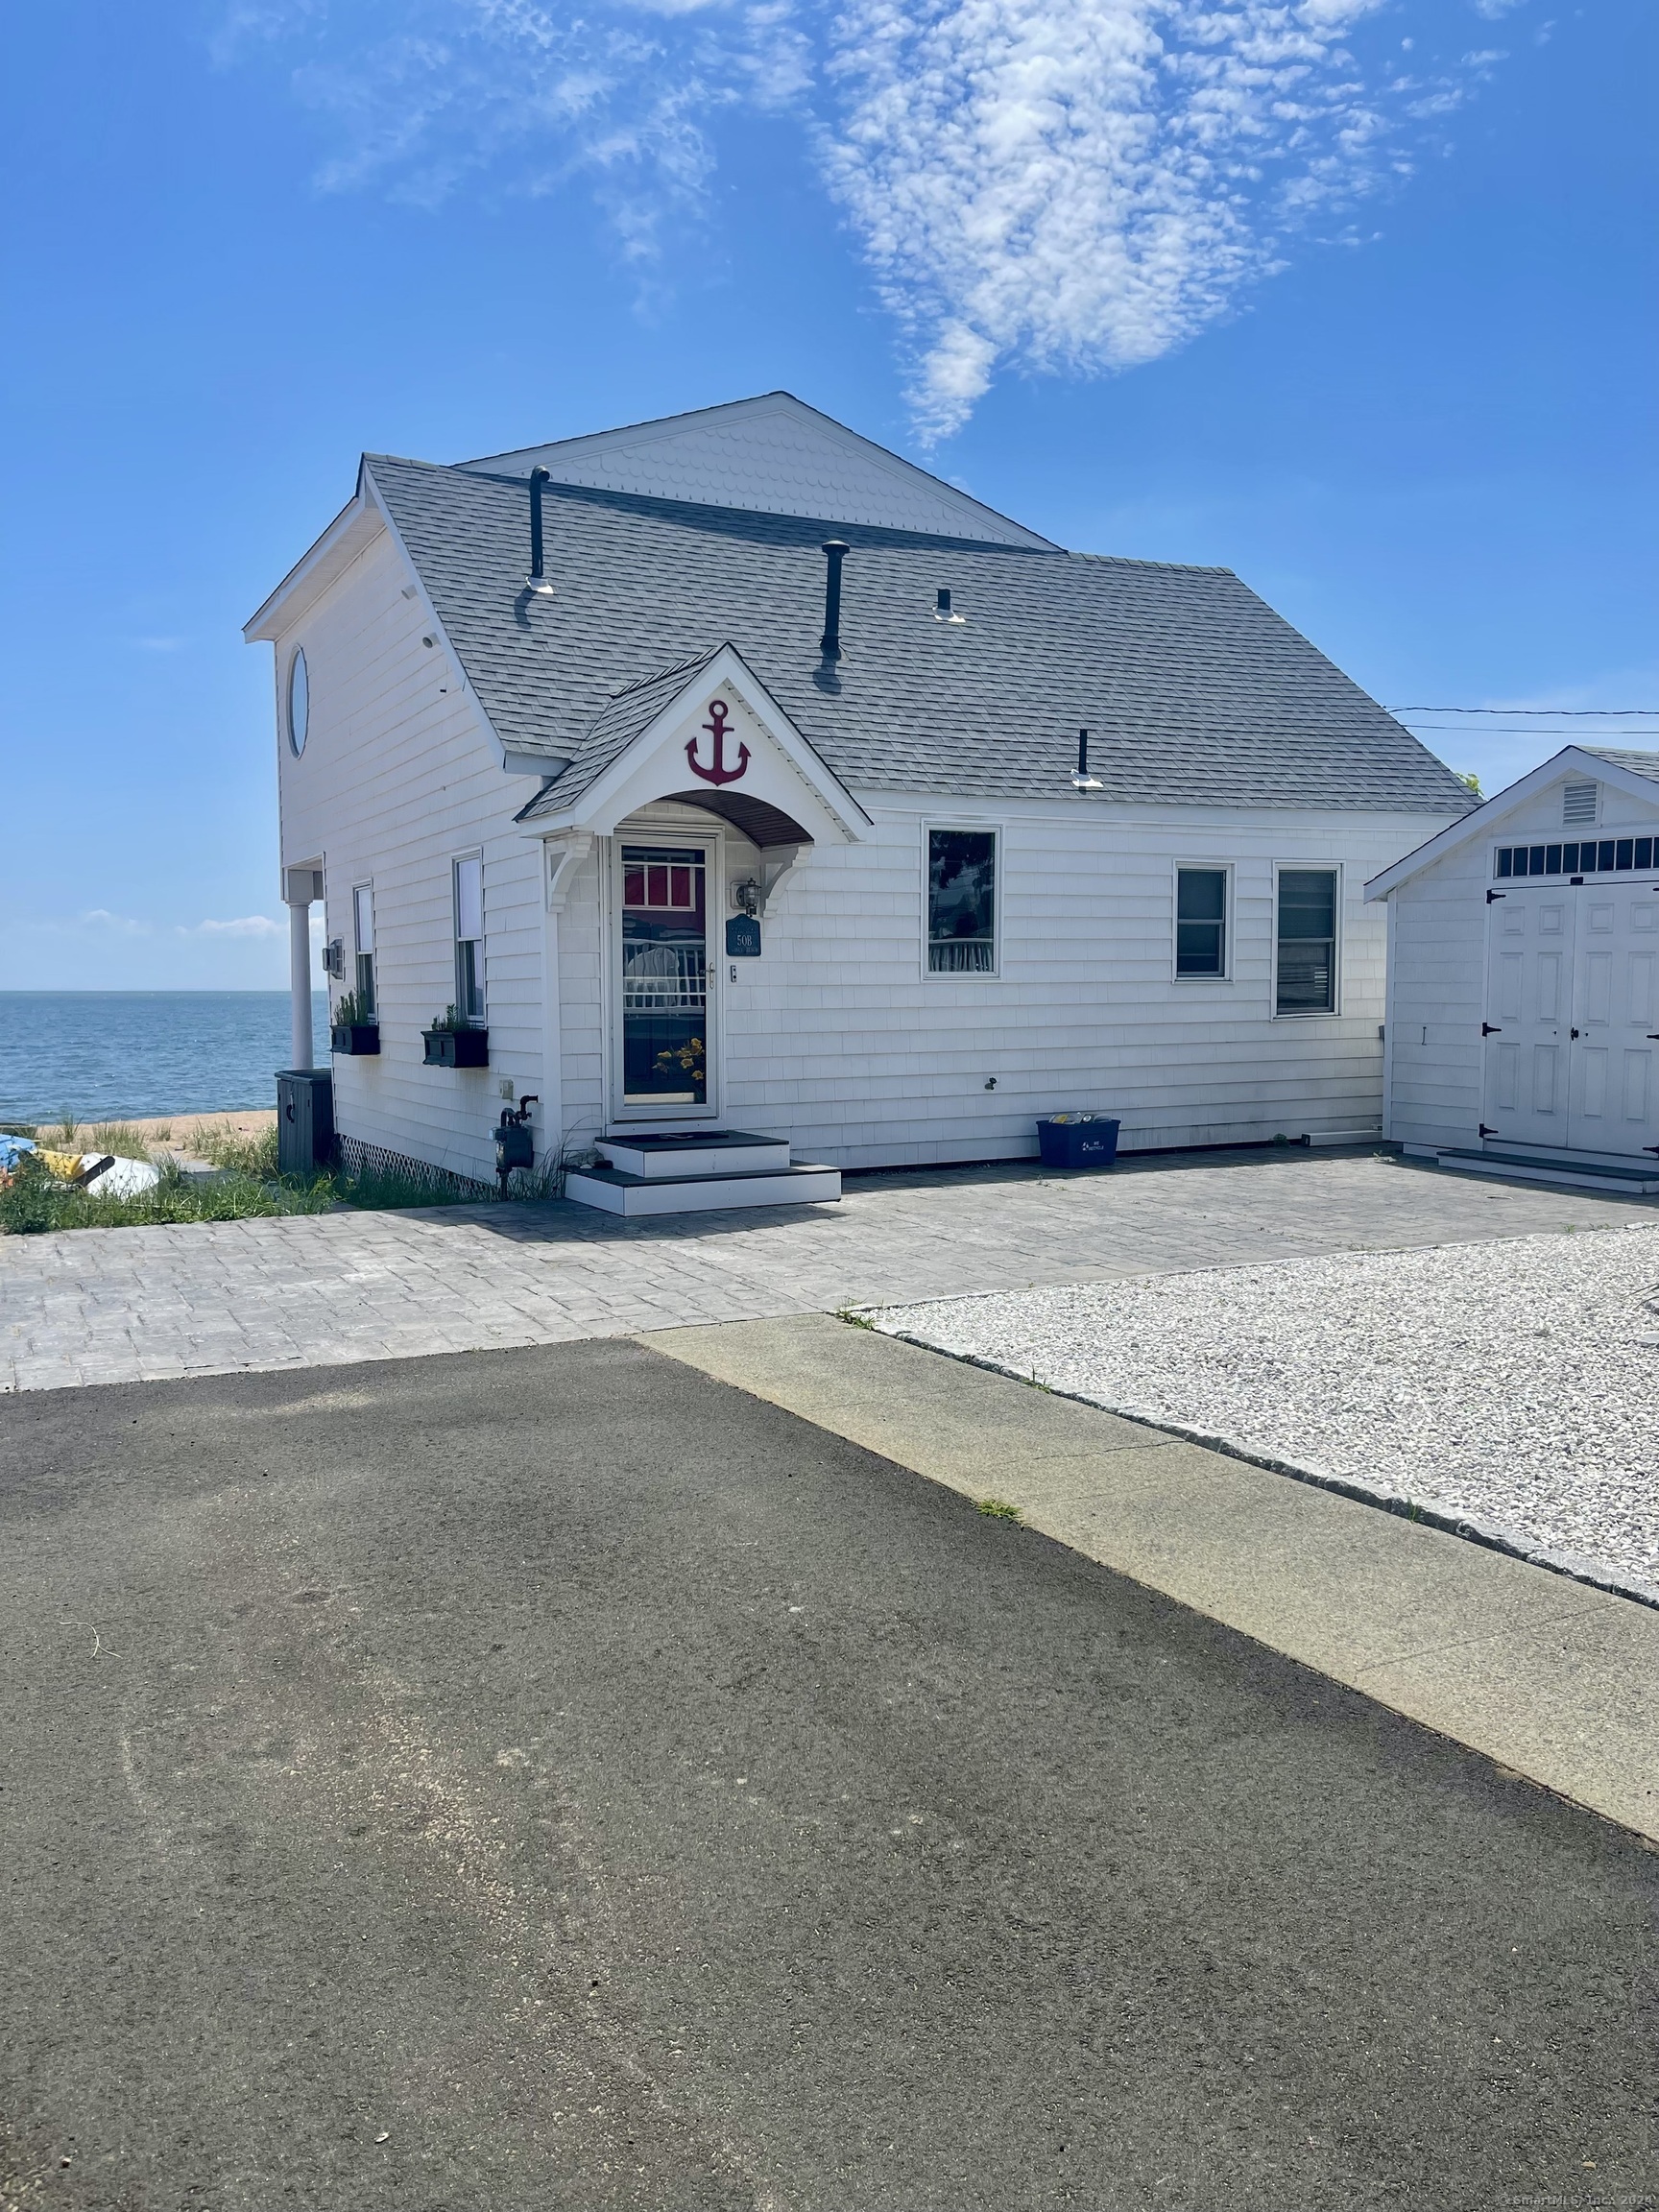 Rental Property at 50 Cosey Beach Avenue, East Haven, Connecticut - Bedrooms: 3 
Bathrooms: 2 
Rooms: 6  - $3,800 MO.